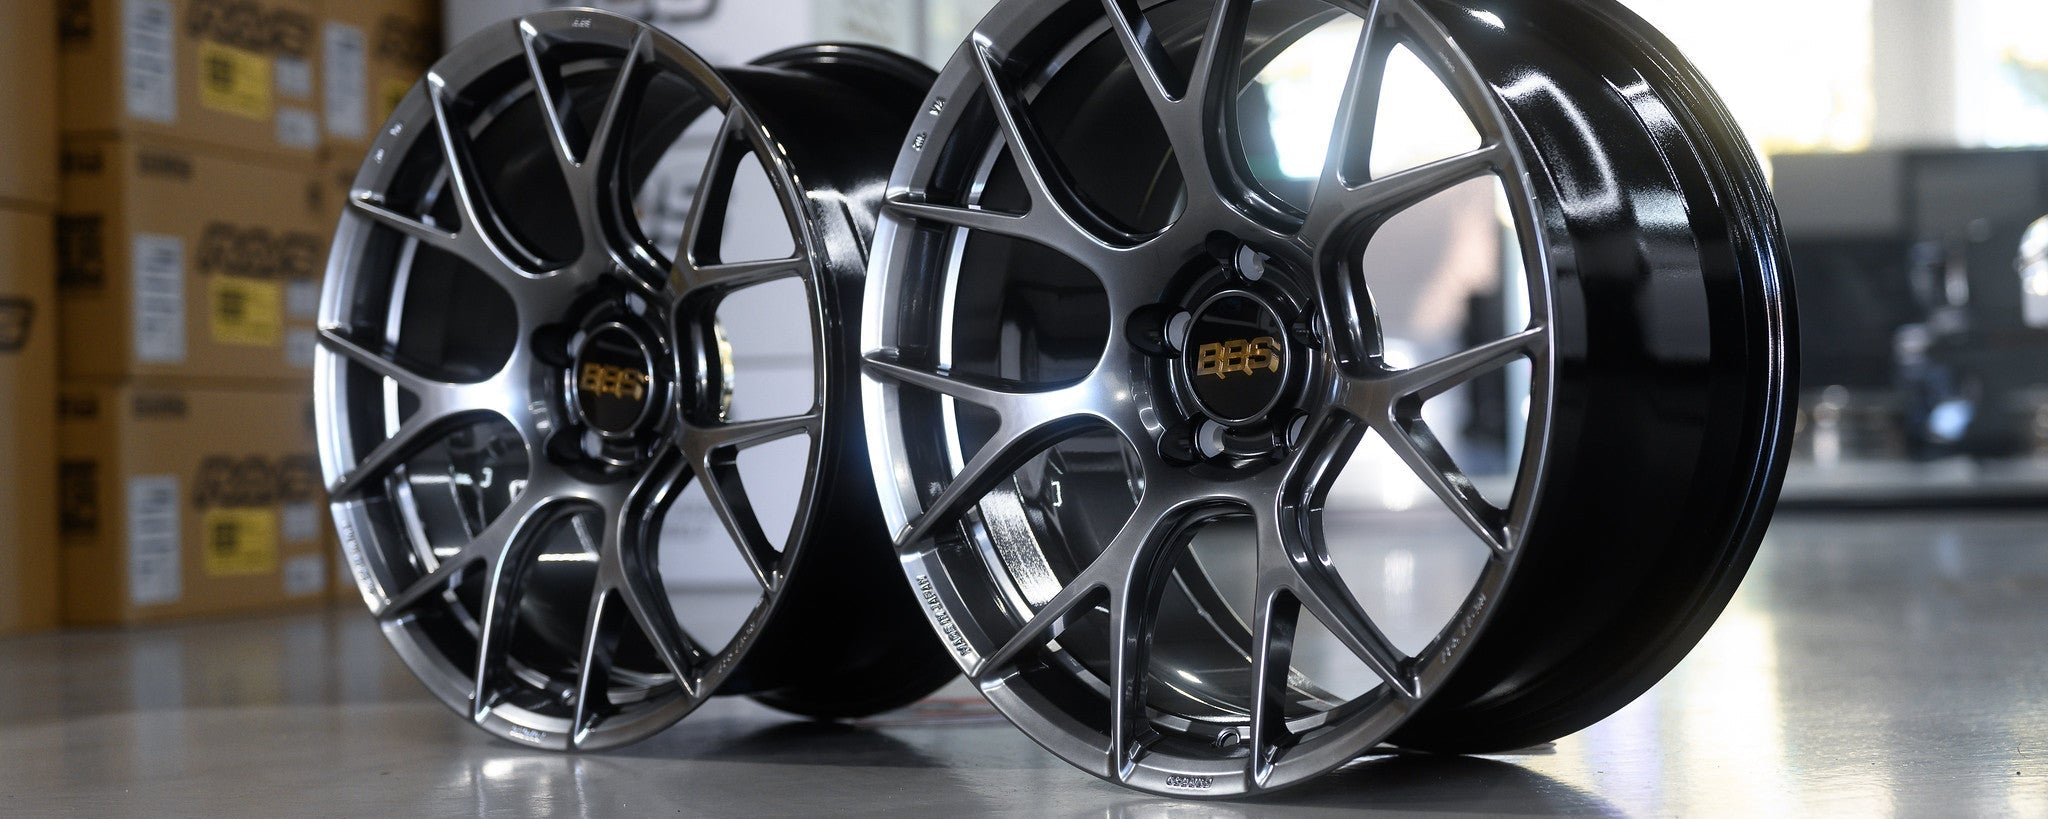 BBS RE-V7 - Premium Wheels from BBS Japan - From just $4790.00! Shop now at MK MOTORSPORTS